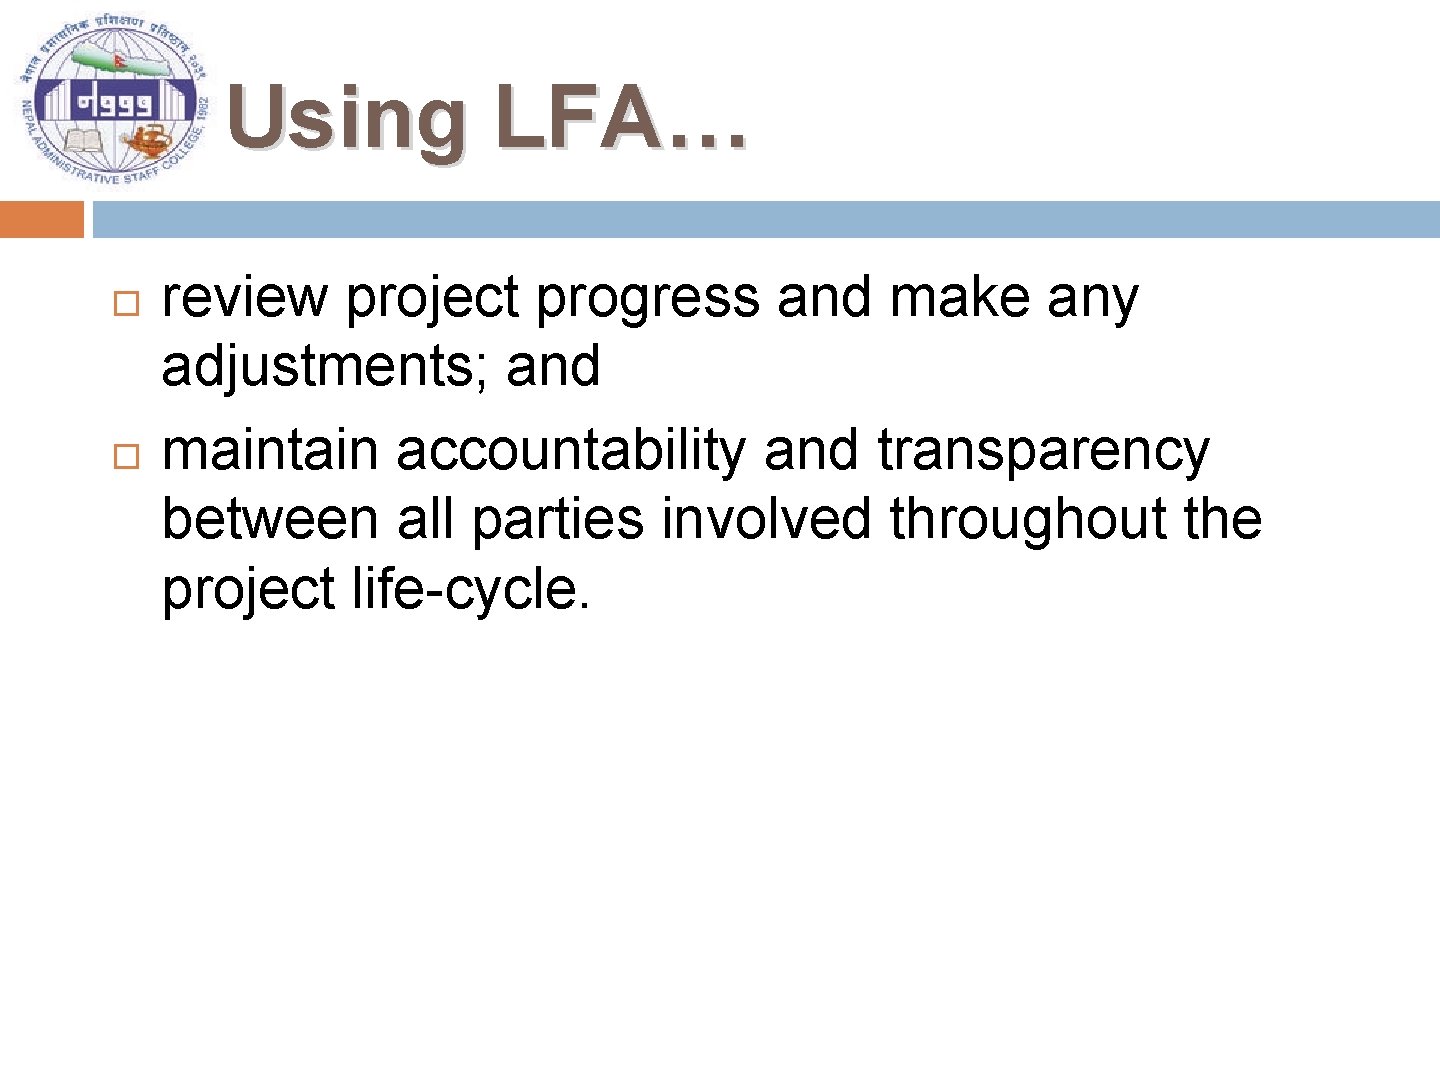 Using LFA… review project progress and make any adjustments; and maintain accountability and transparency